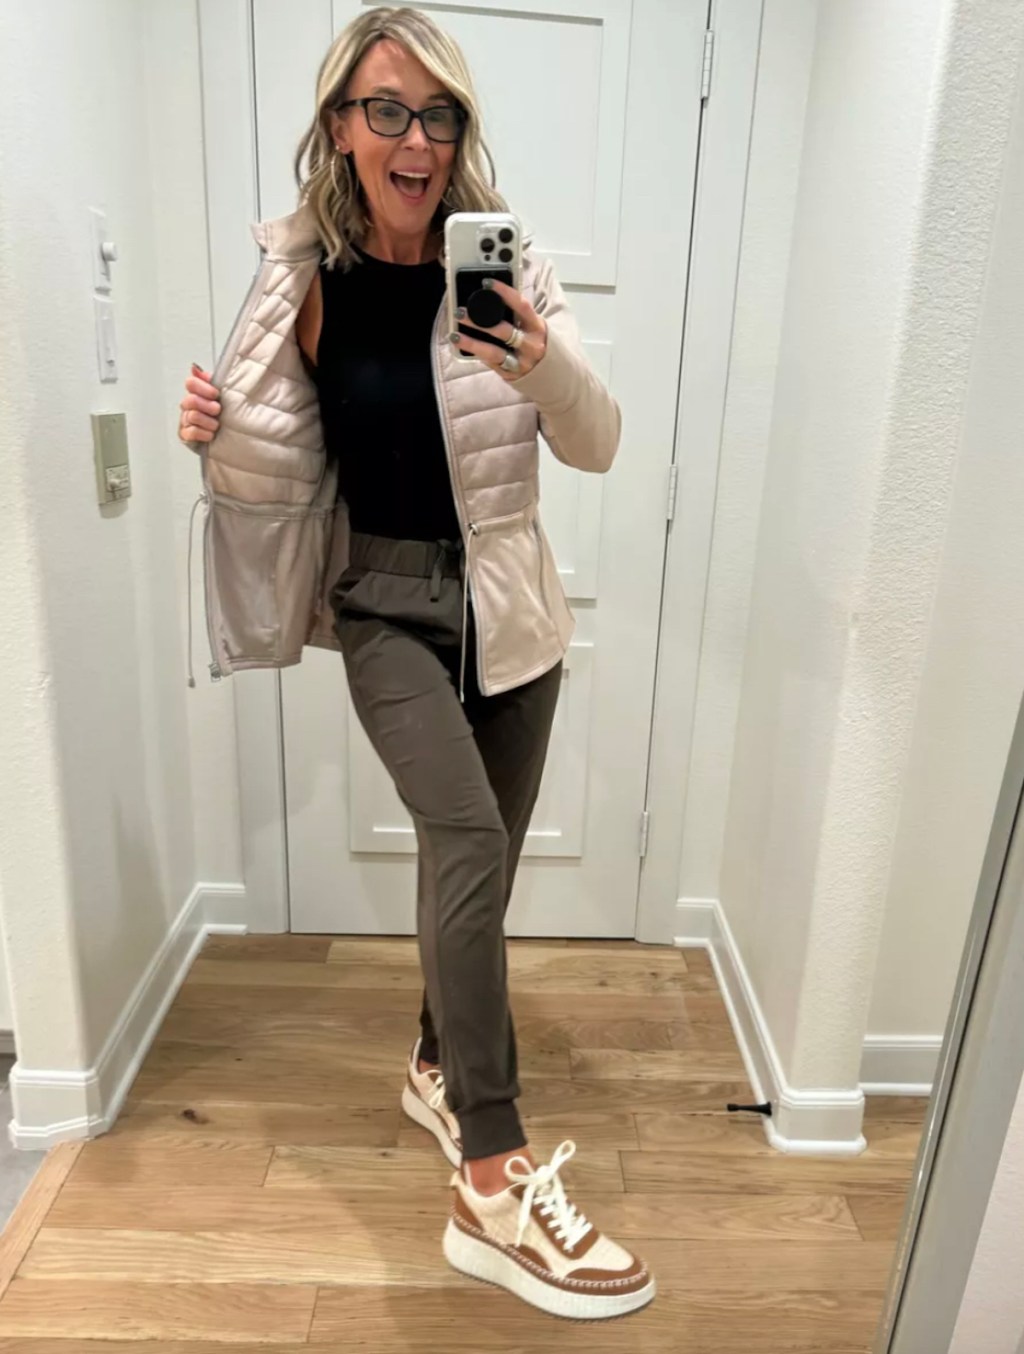 woman taking mirror selfie wearing athletic outfit